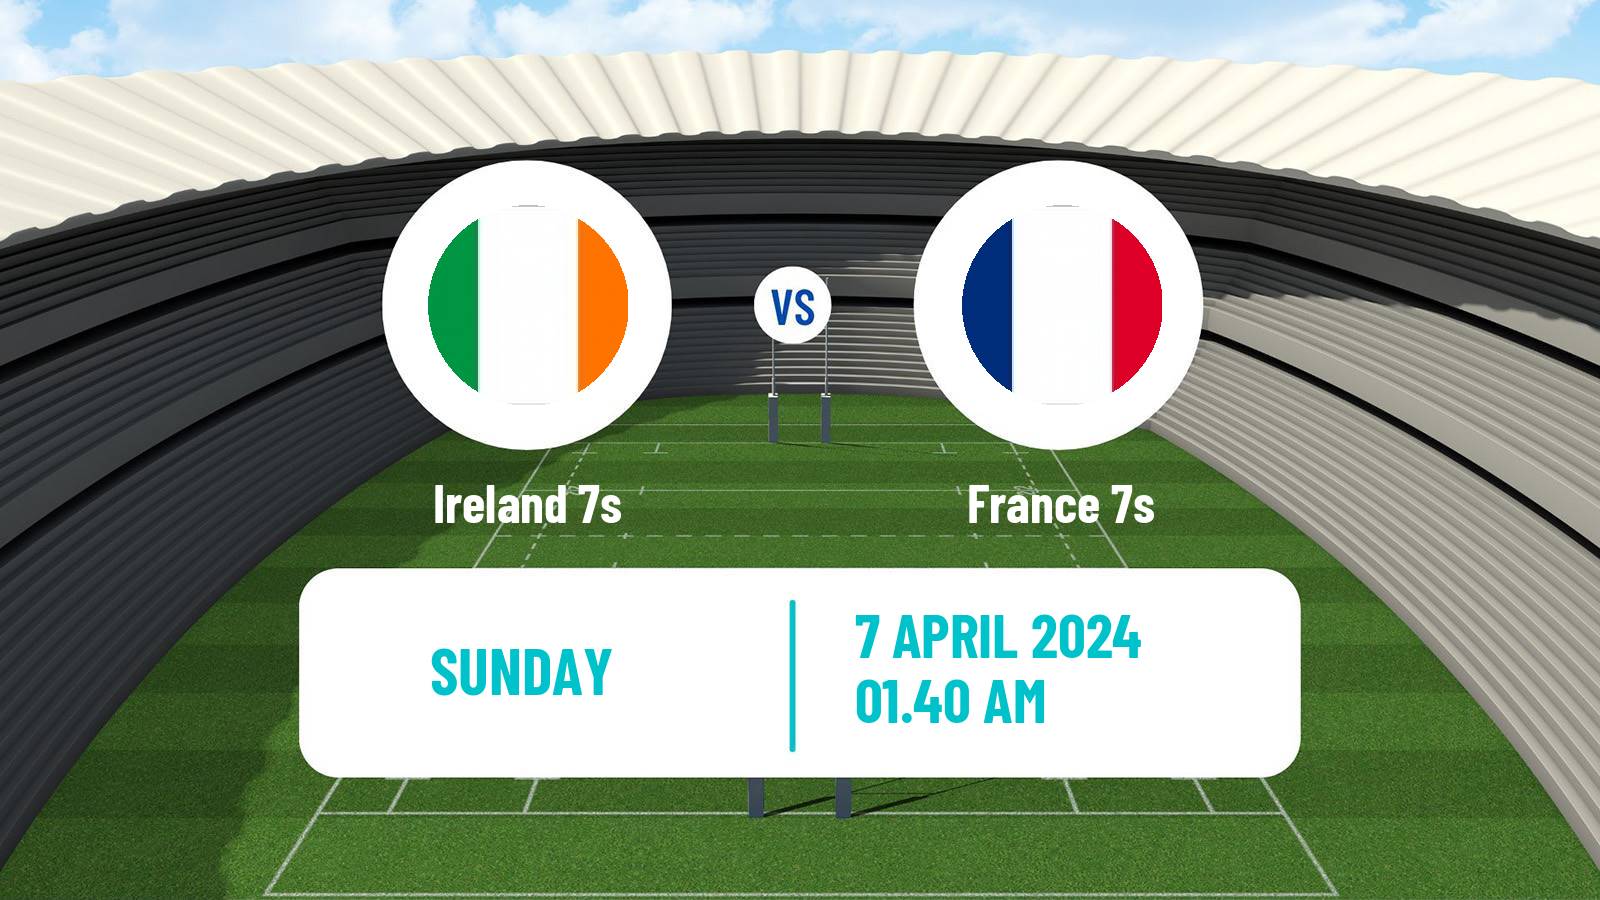 Rugby union Sevens World Series - Hong Kong Ireland 7s - France 7s